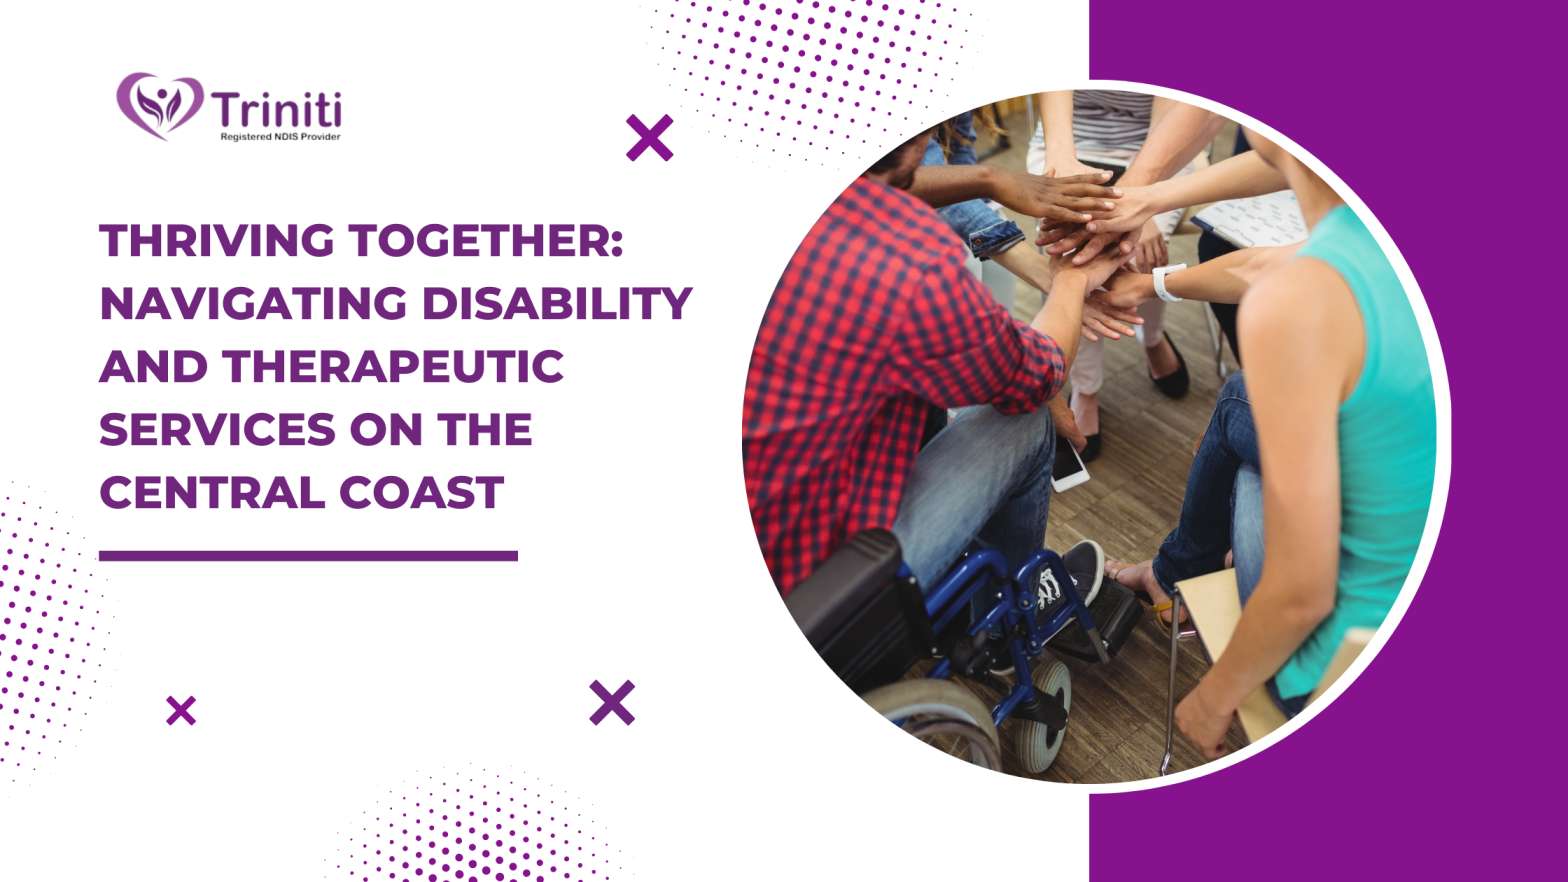 Thriving Together: Navigating Disability and Therapeutic Services on the Central Coast